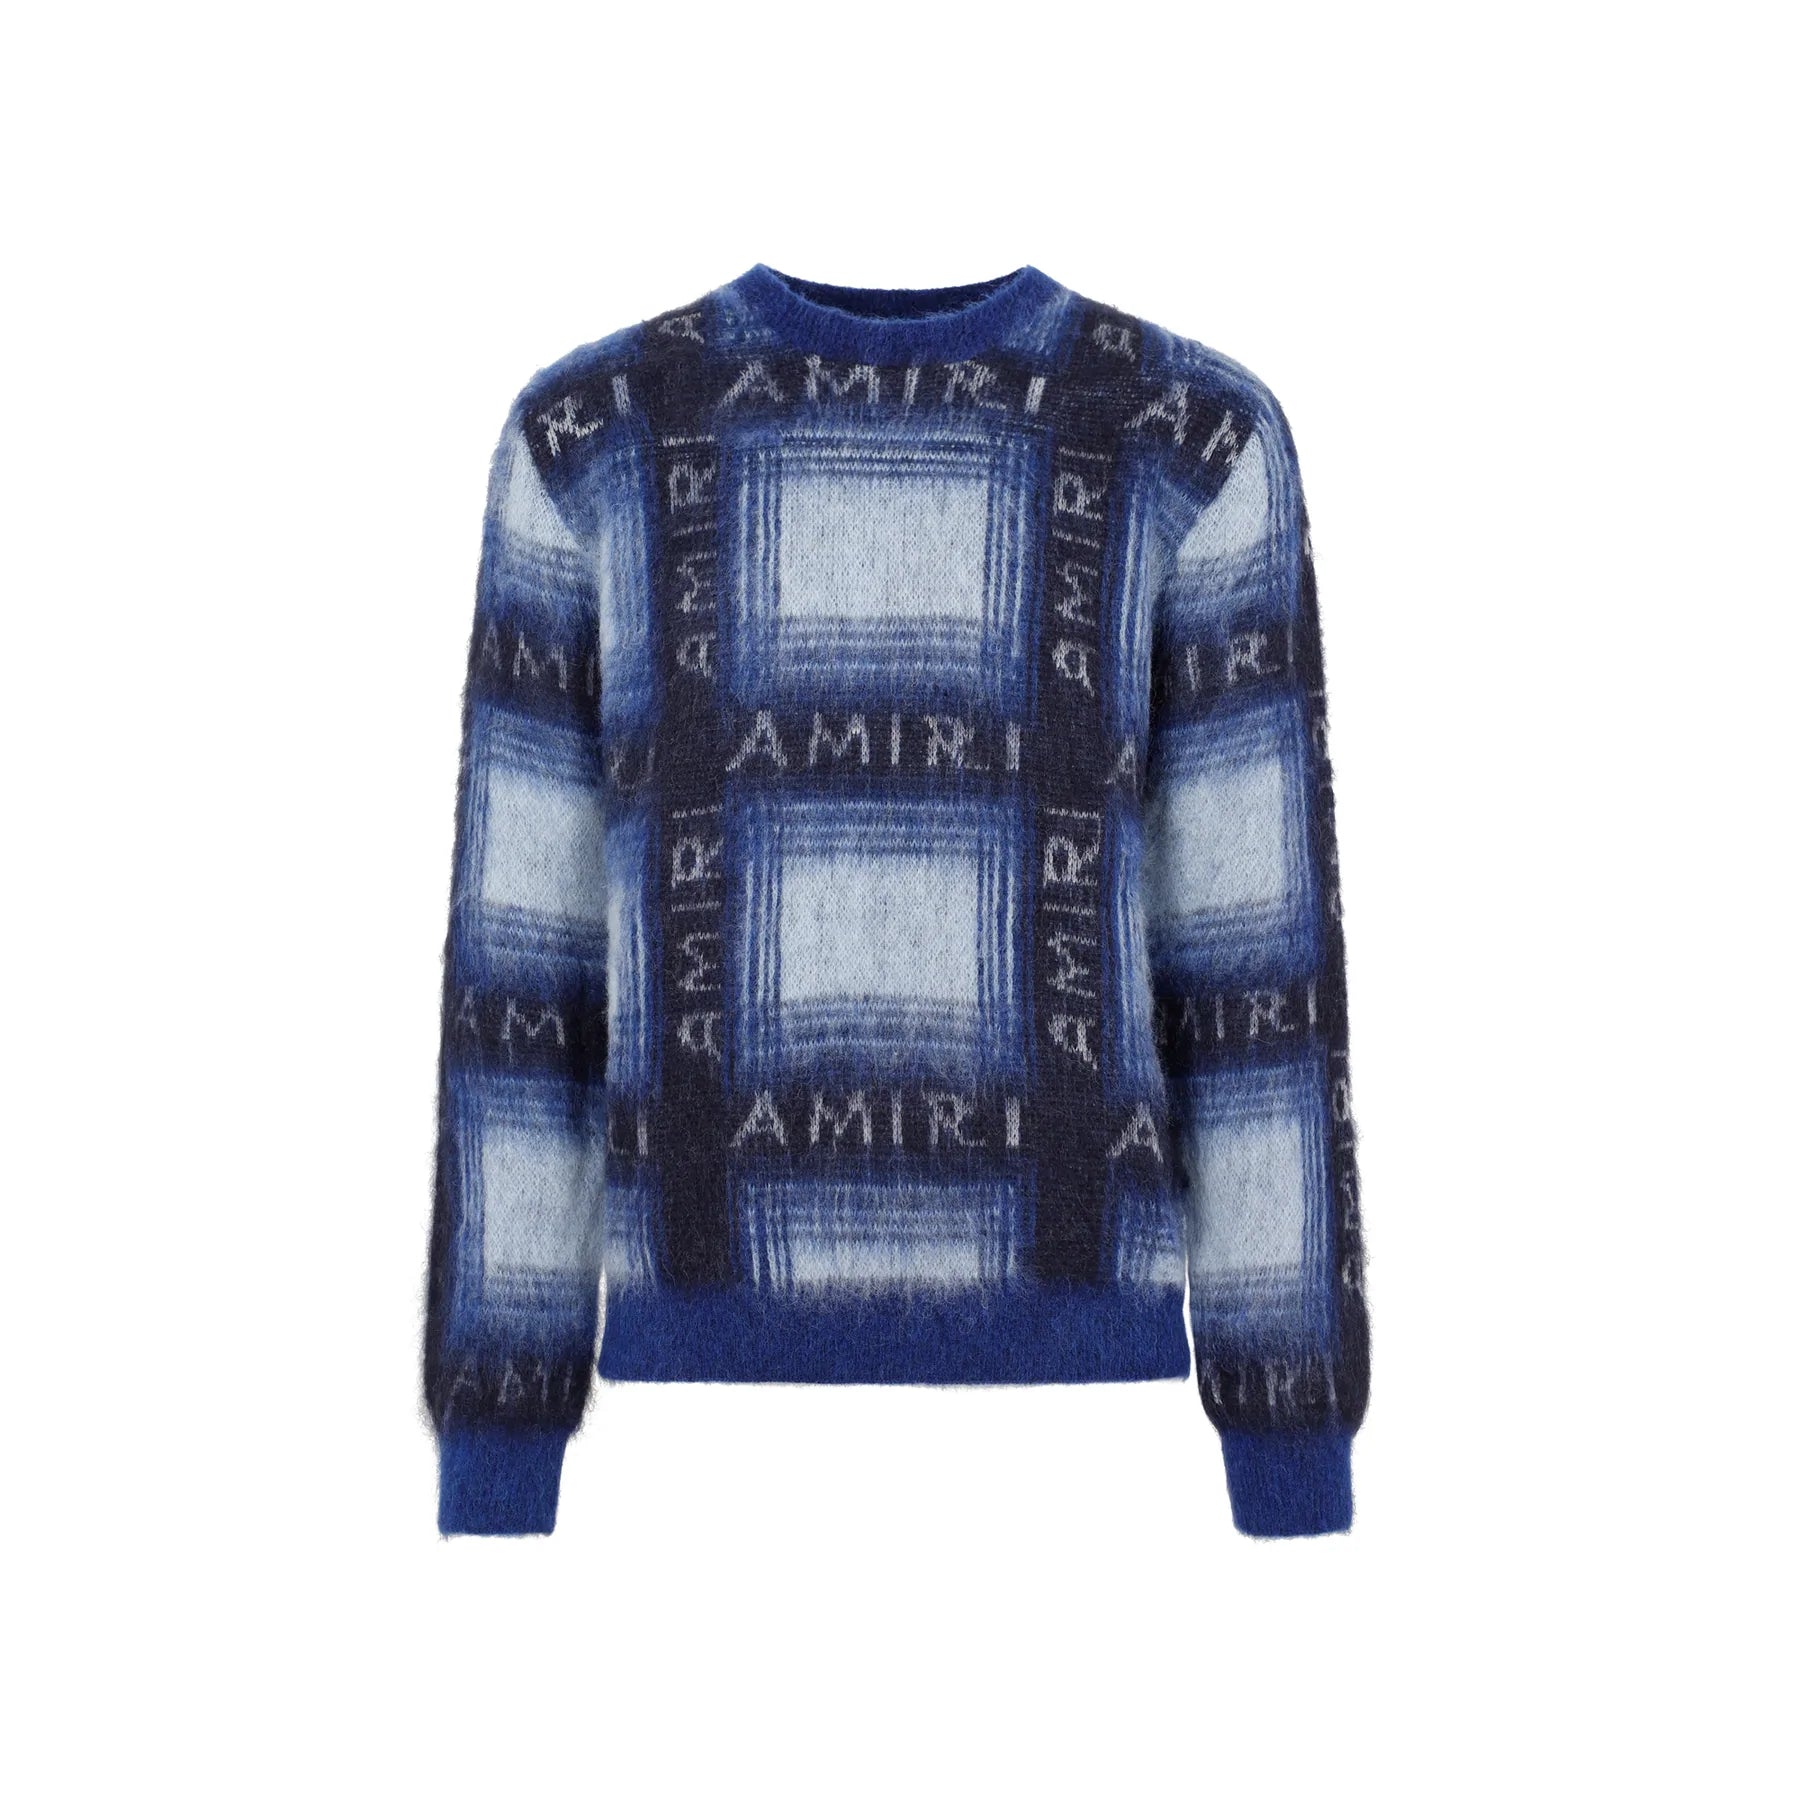 AMIRI MOHAIR PLAID SWEATER FOR RENT, LUXURY CLOTHING RENTAL